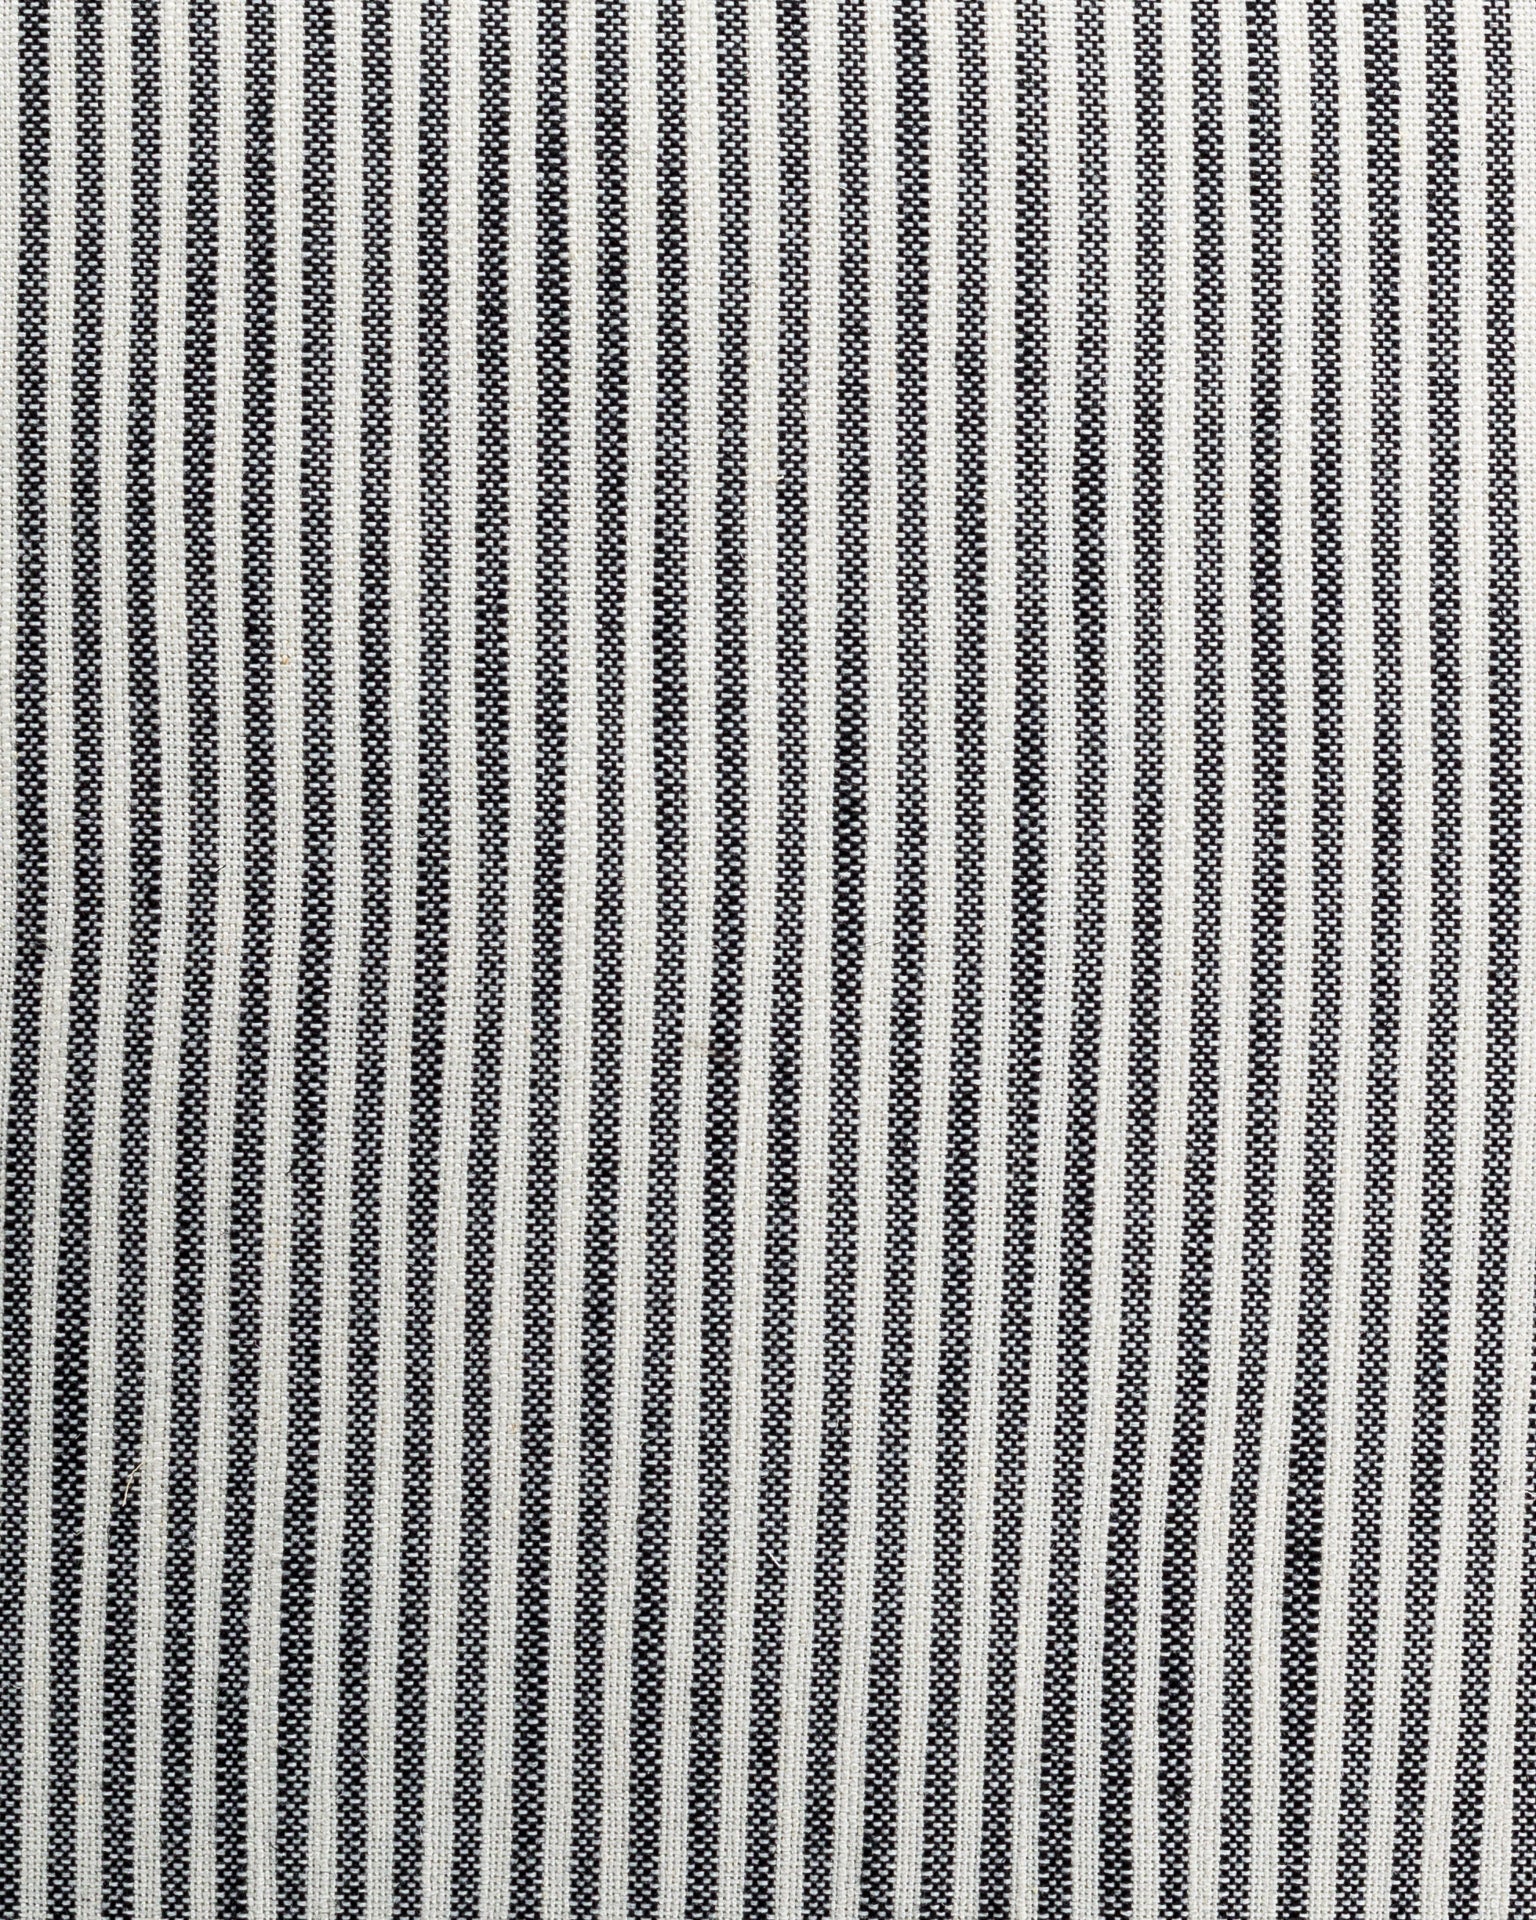 Black and white striped pattern with alternating narrow and broad stripes, creating a textured visual effect on a Gabby Skinny Stripe Classic Pillow 26x26 fabric surface.